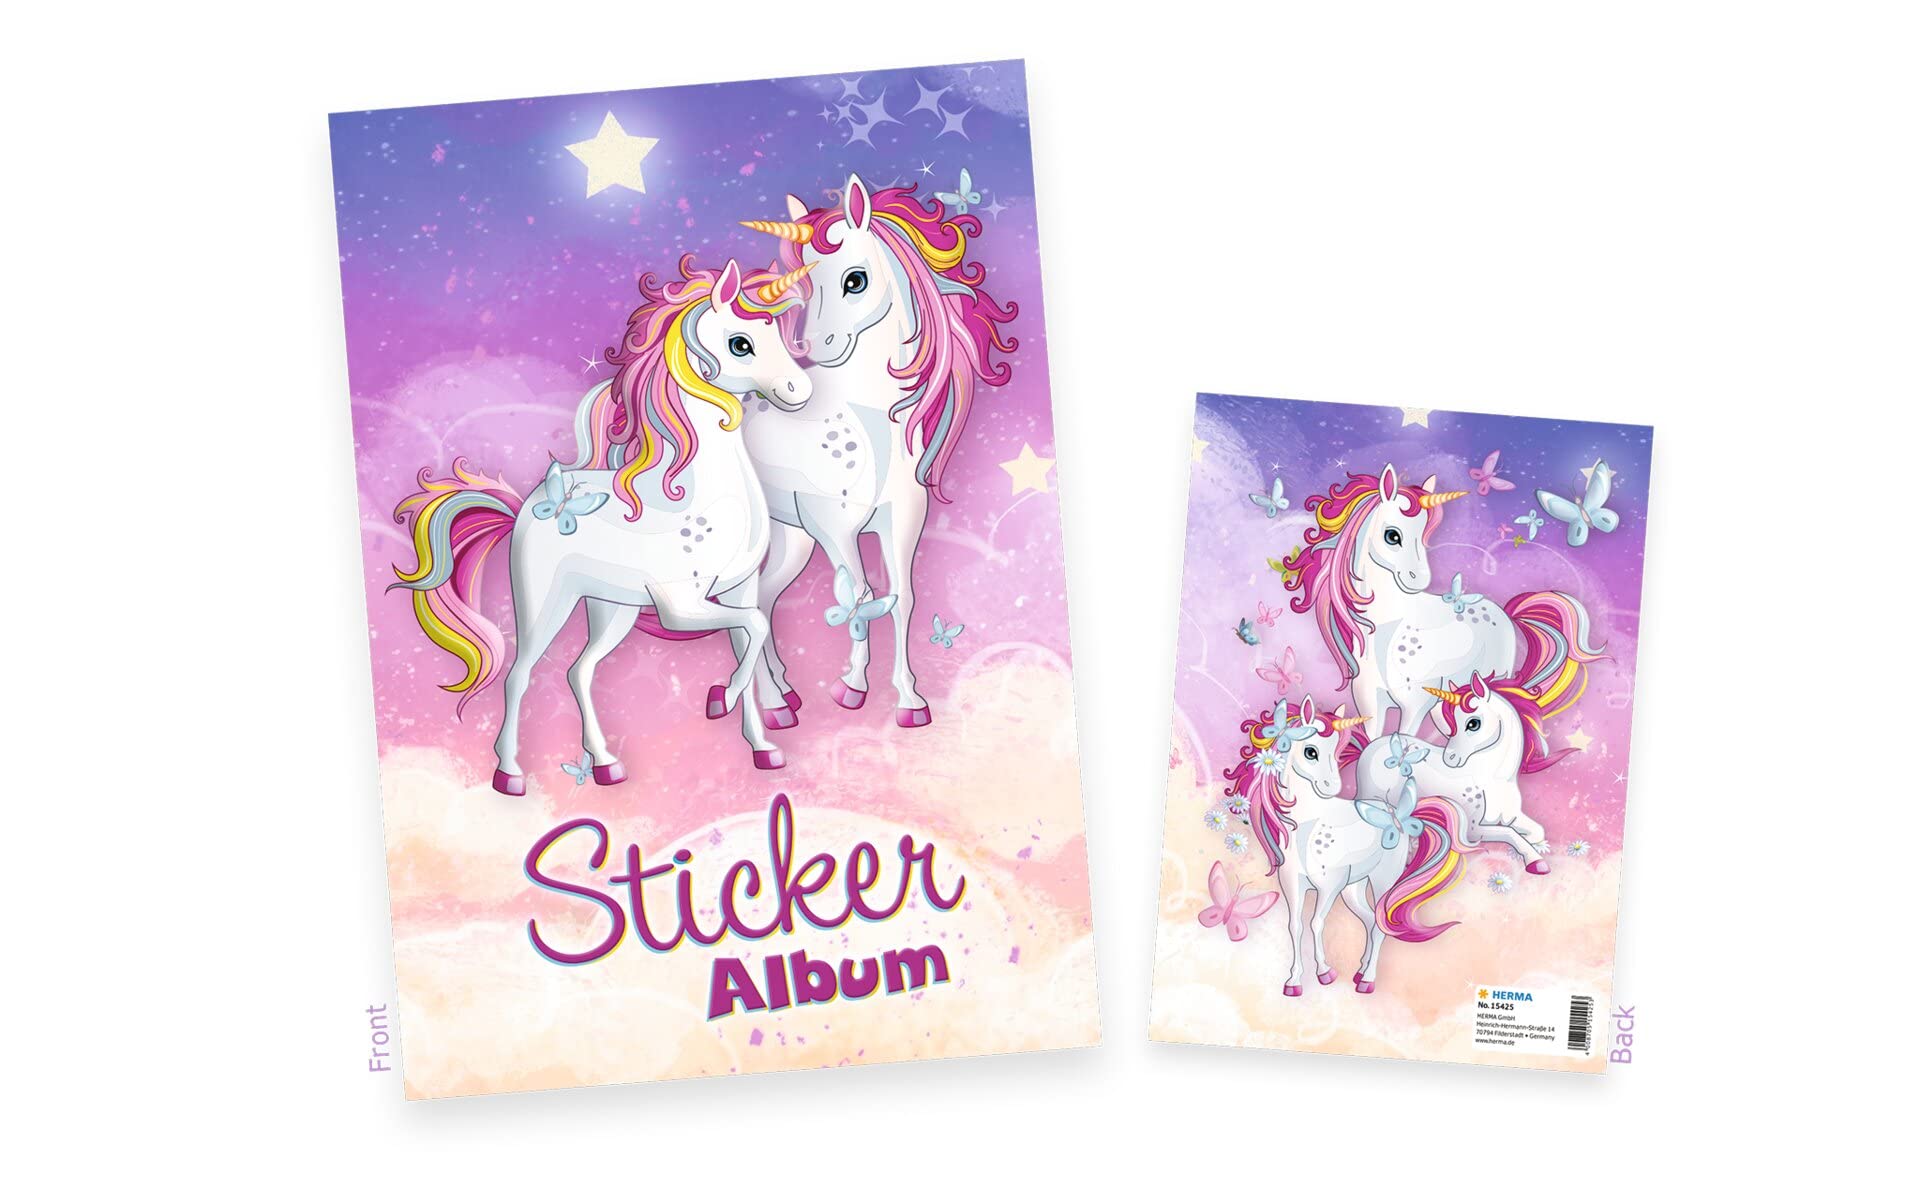 HERMA 15425 Sticker Album Unicorn DIN A5 Blank (16 Pages, Coated Special Paper) Sticker Scrapbook for Collecting, 1 Sticker Book for Girls, Blank